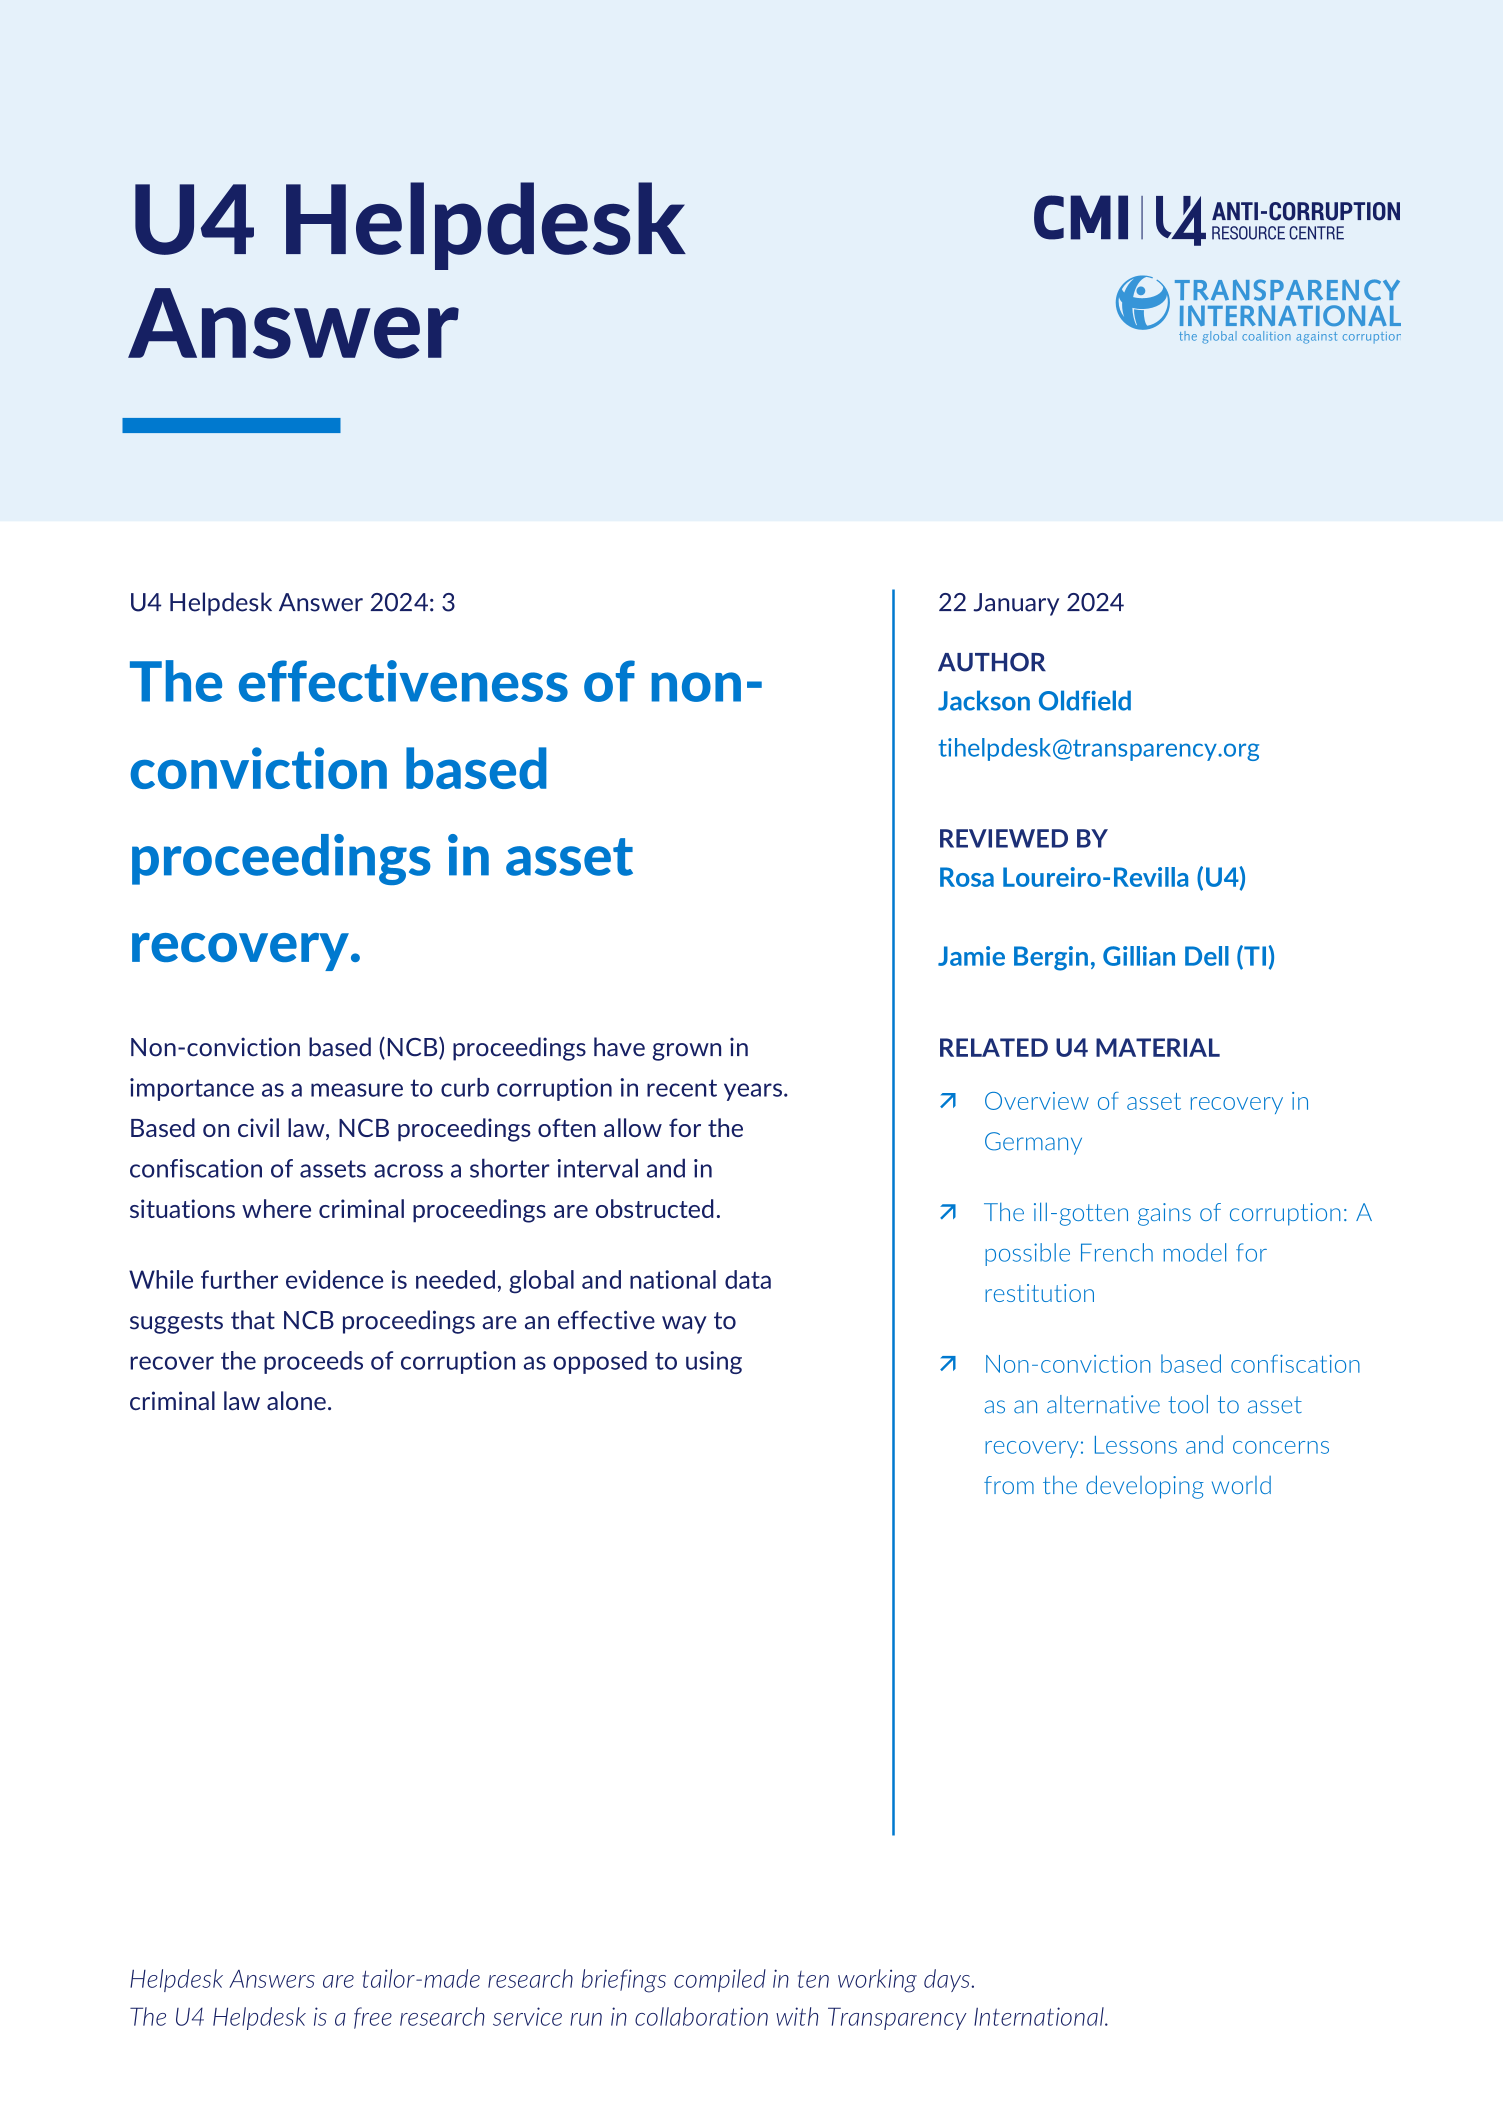 The effectiveness of non-conviction based proceedings in asset recovery